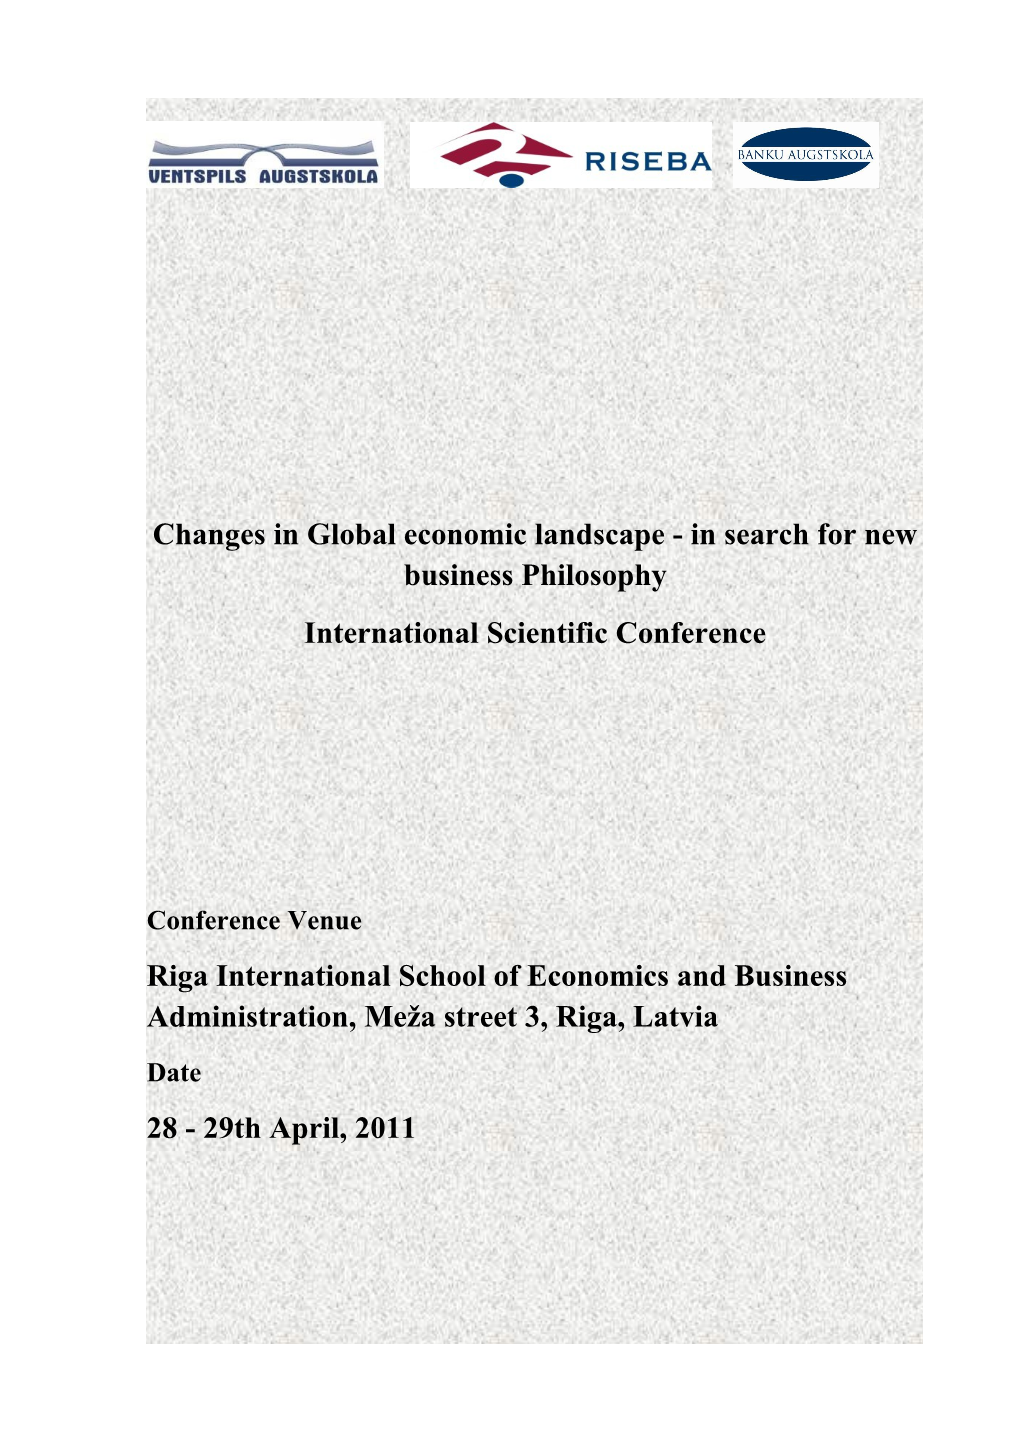 Changes in Global Economic Landscape - in Search for New Business Philosophy